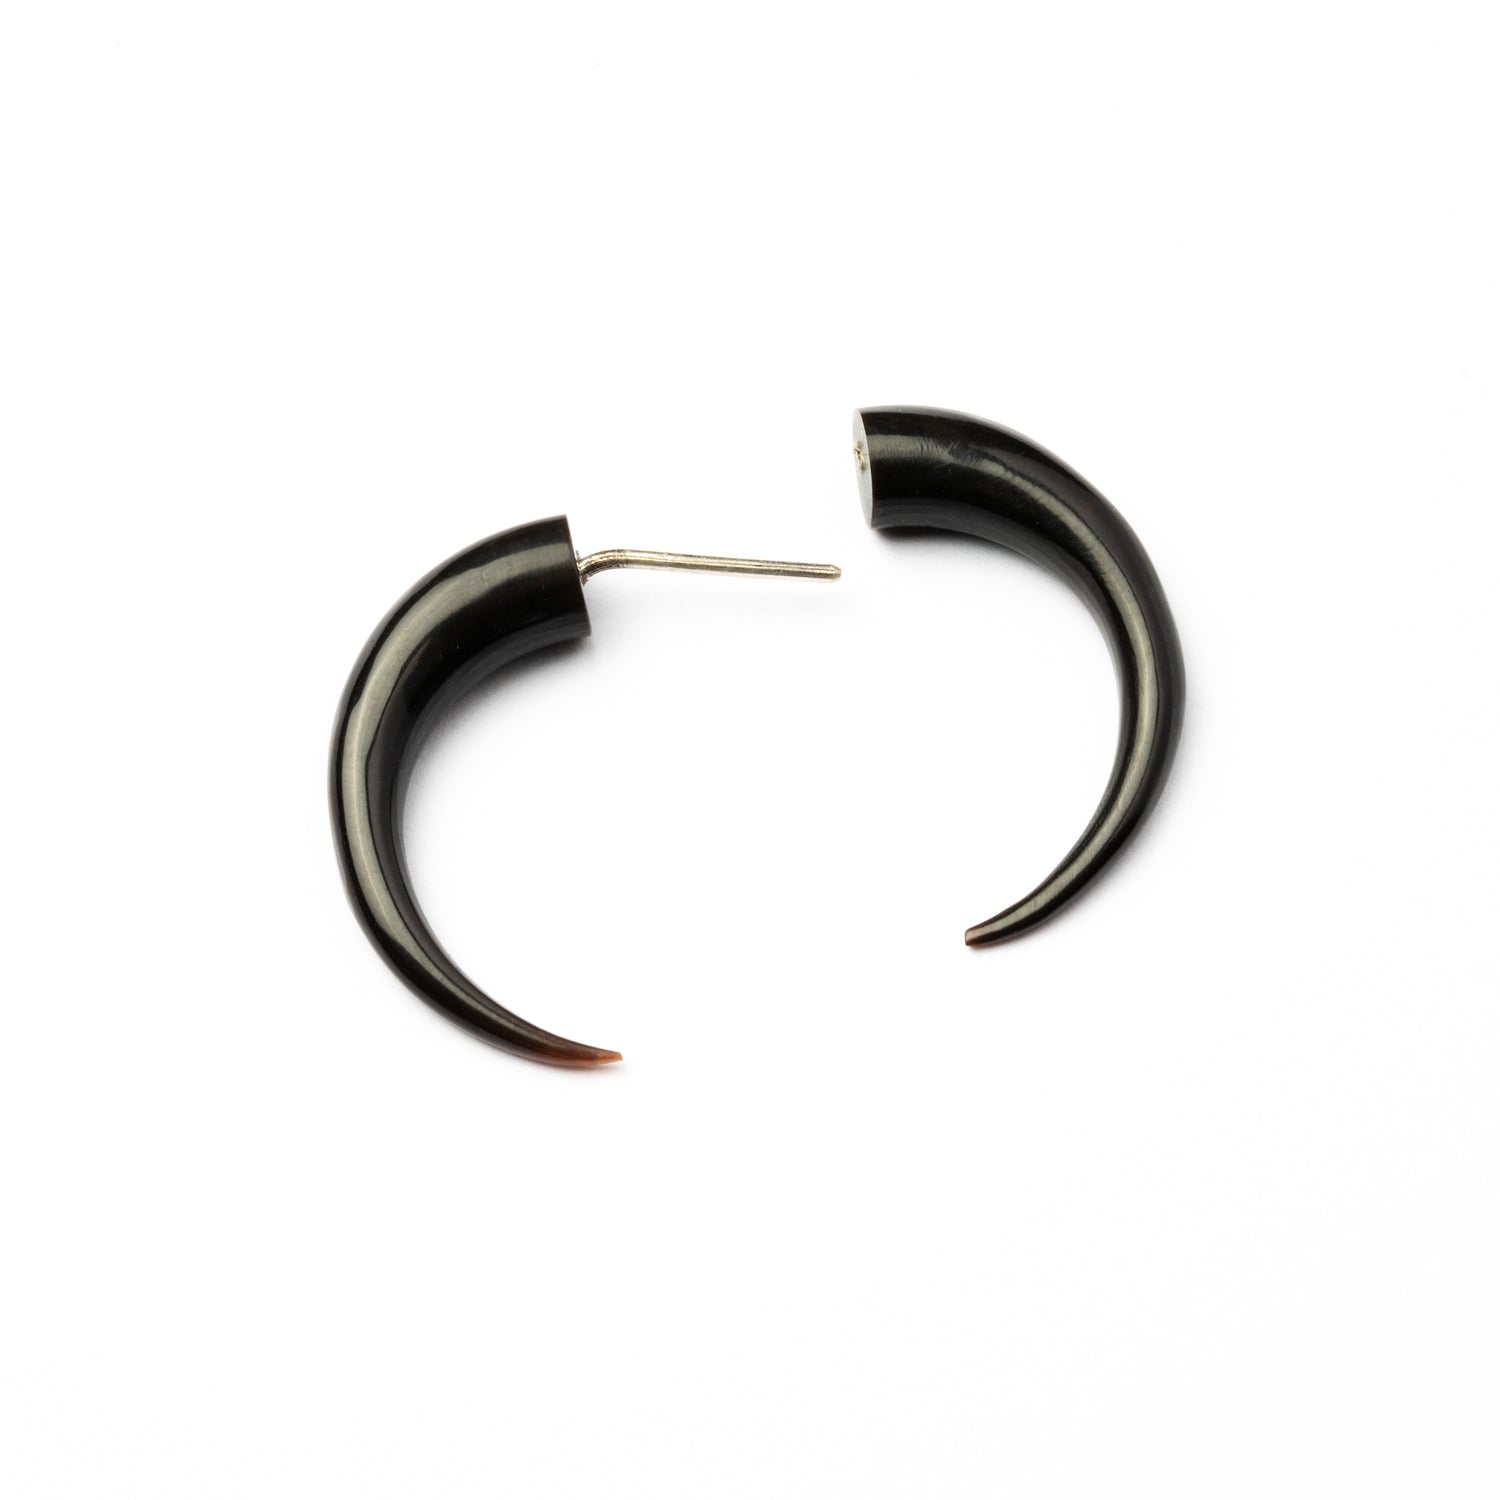 single Taper fake gauge earring, hand carved out of water buffalo horn, fitted with a silver post closure view